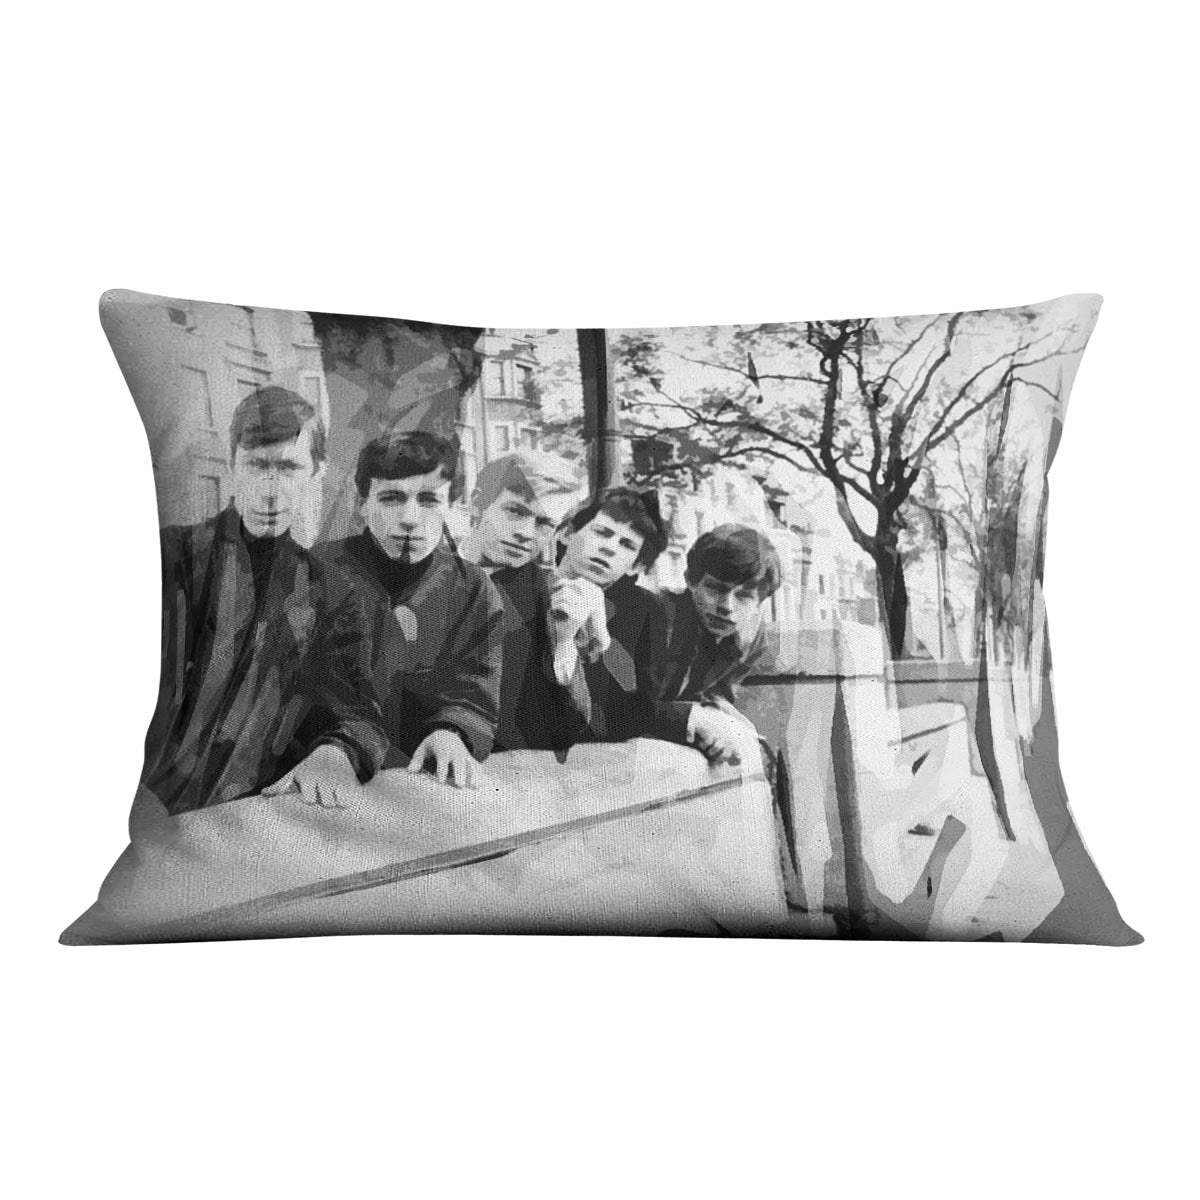 Rolling Stones early days Cushion